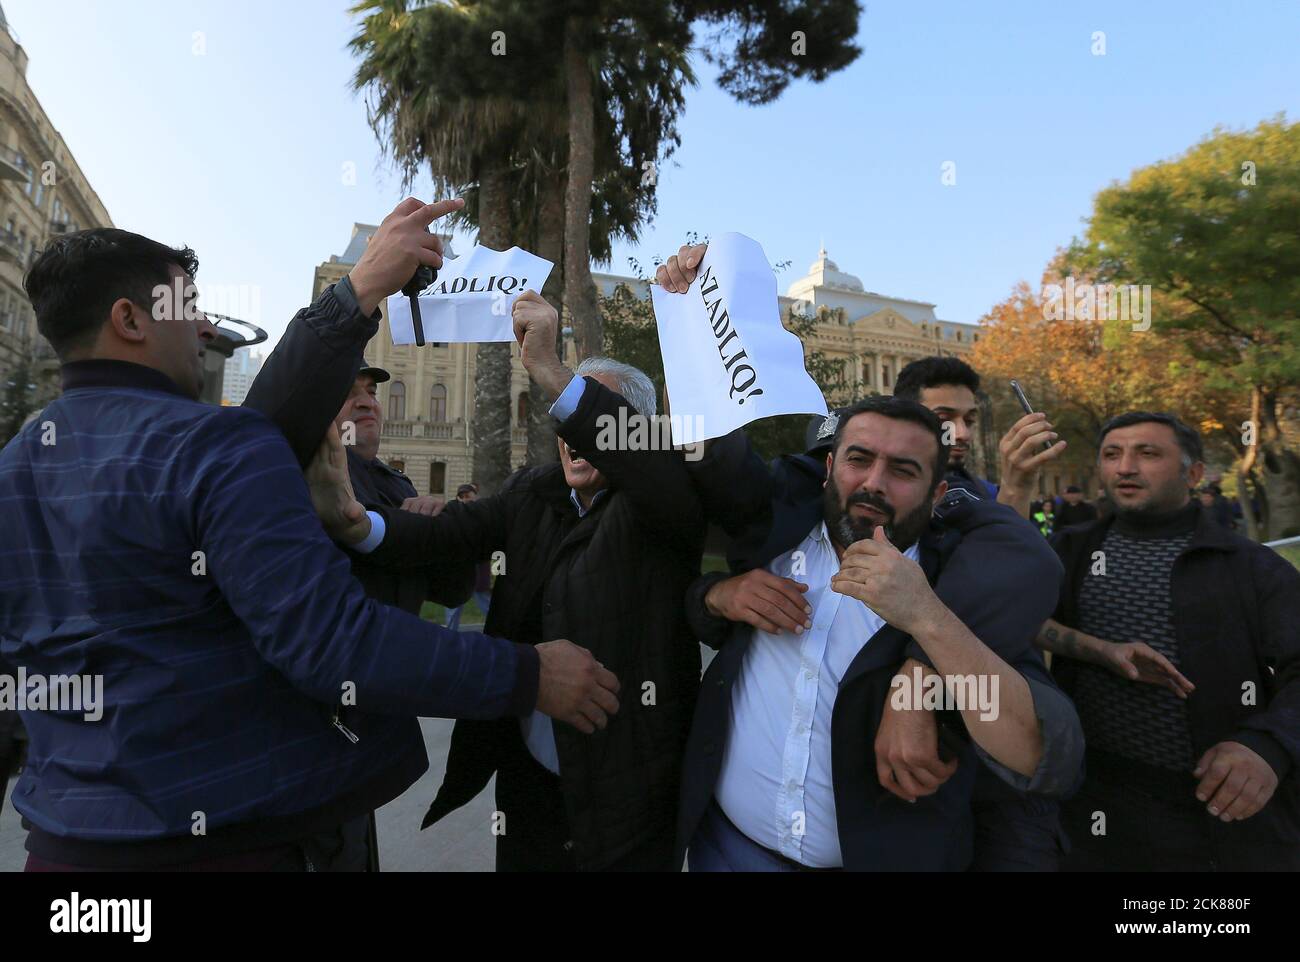 Azeri law enforcement officers detain participants of an unauthorized opposition rally to demand freedom of assembly in Baku, Azerbaijan November 12, 2019. The placards read 'Freedom!' REUTERS/Aziz Karimov Stock Photo